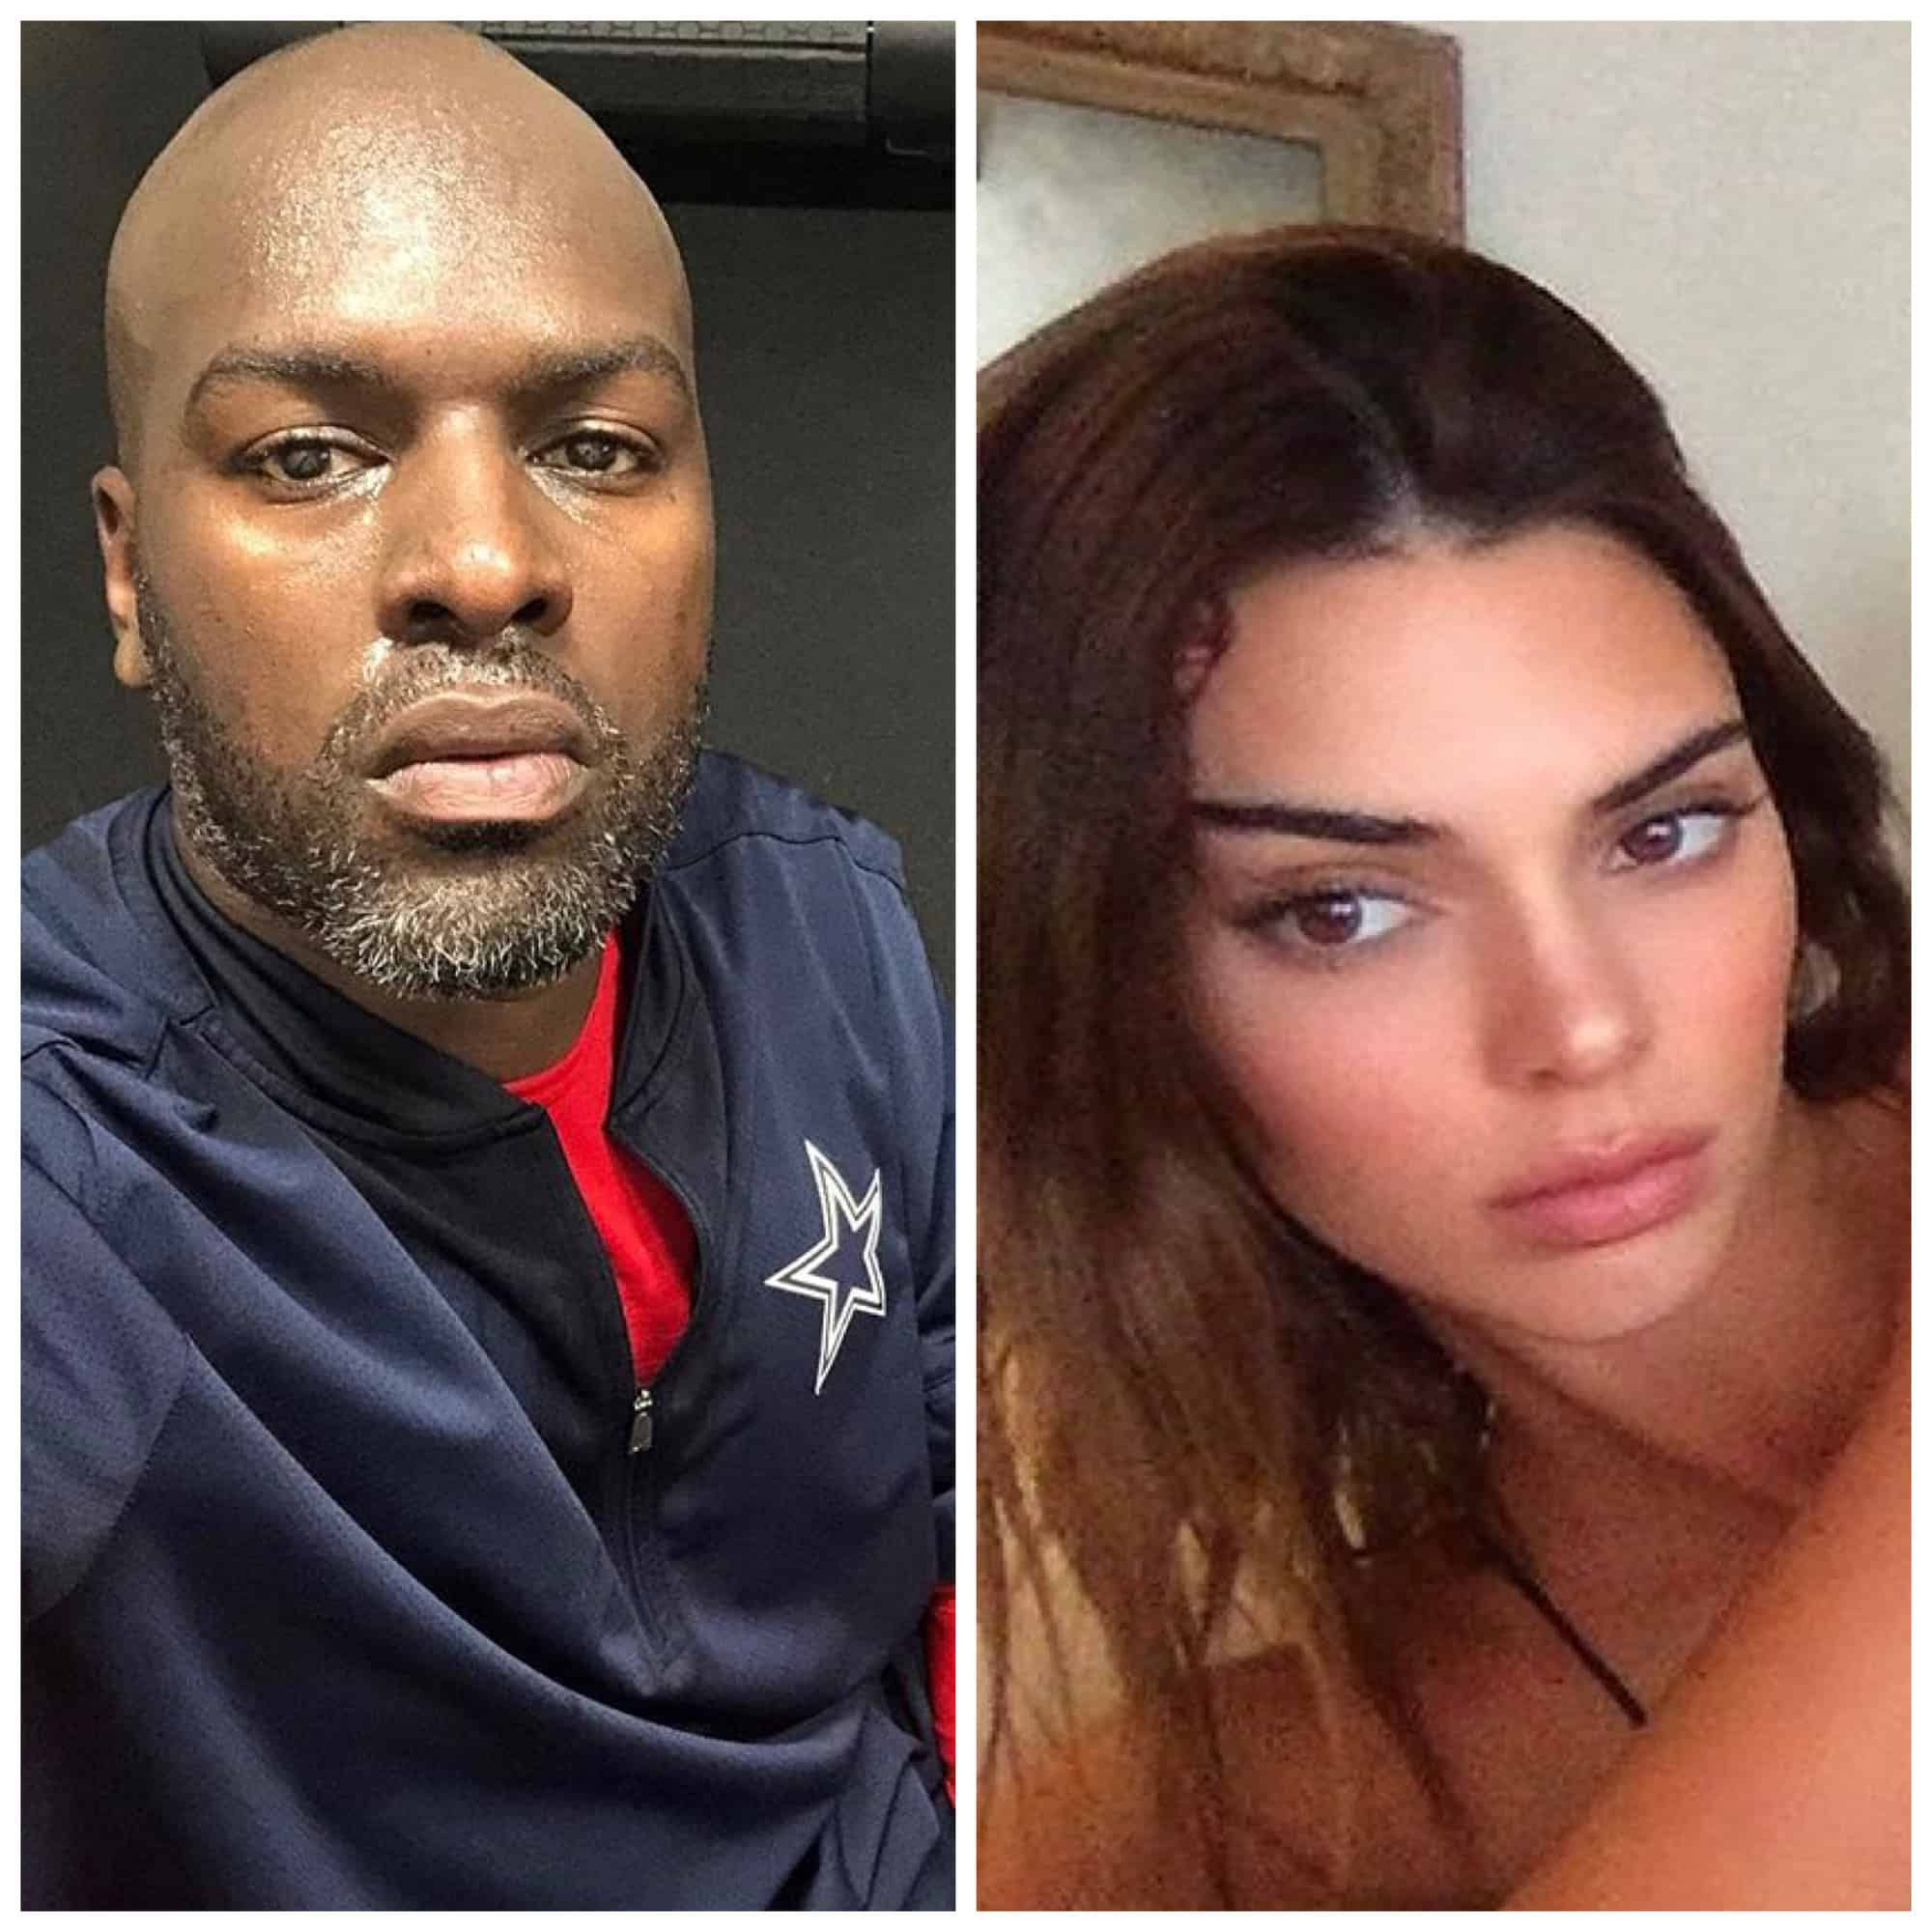 Corey Gamble Calls Kendall Jenner “Rude” And An “A**hole” On Recent “KUWTK” Episode After They Get Into An Argument